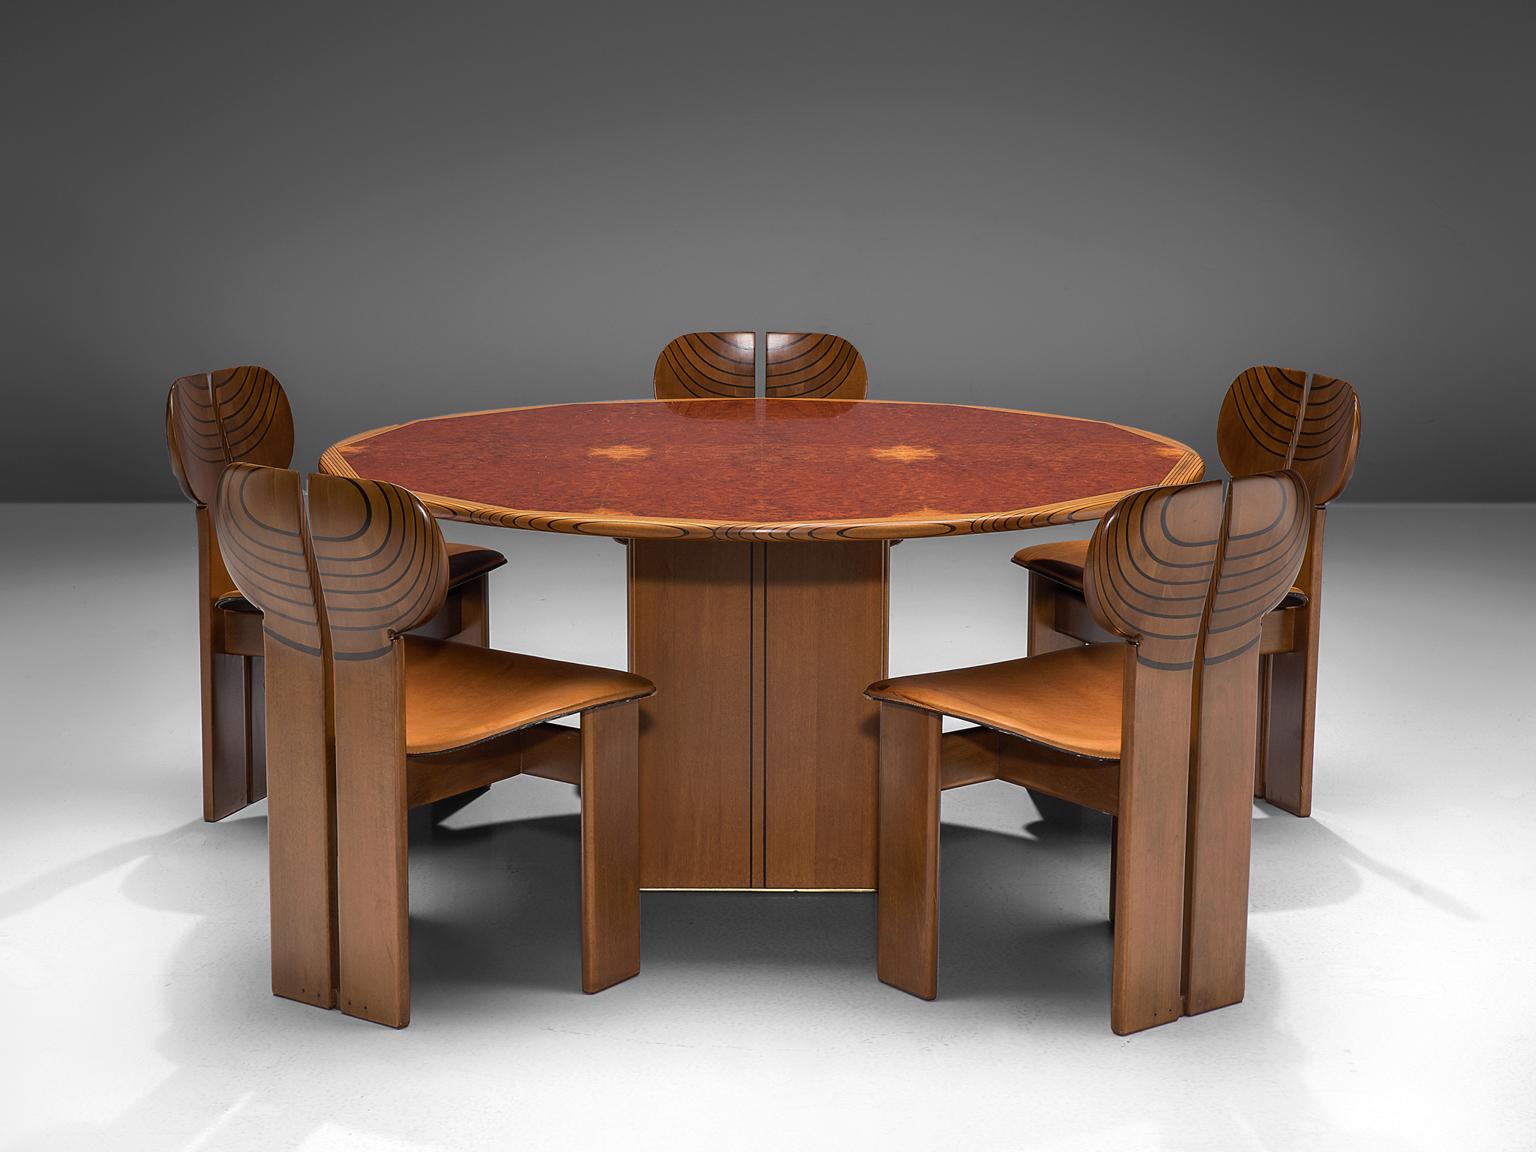 Afra & Tobia Scarpa from Maxalto, dining table from the Africa series, burl, walnut, ebony, Italy, 1975.

This dining set including a table and five chairs is designed by Afra & Tobia Scarpa and is titled 'Africa' and is part of the Artona